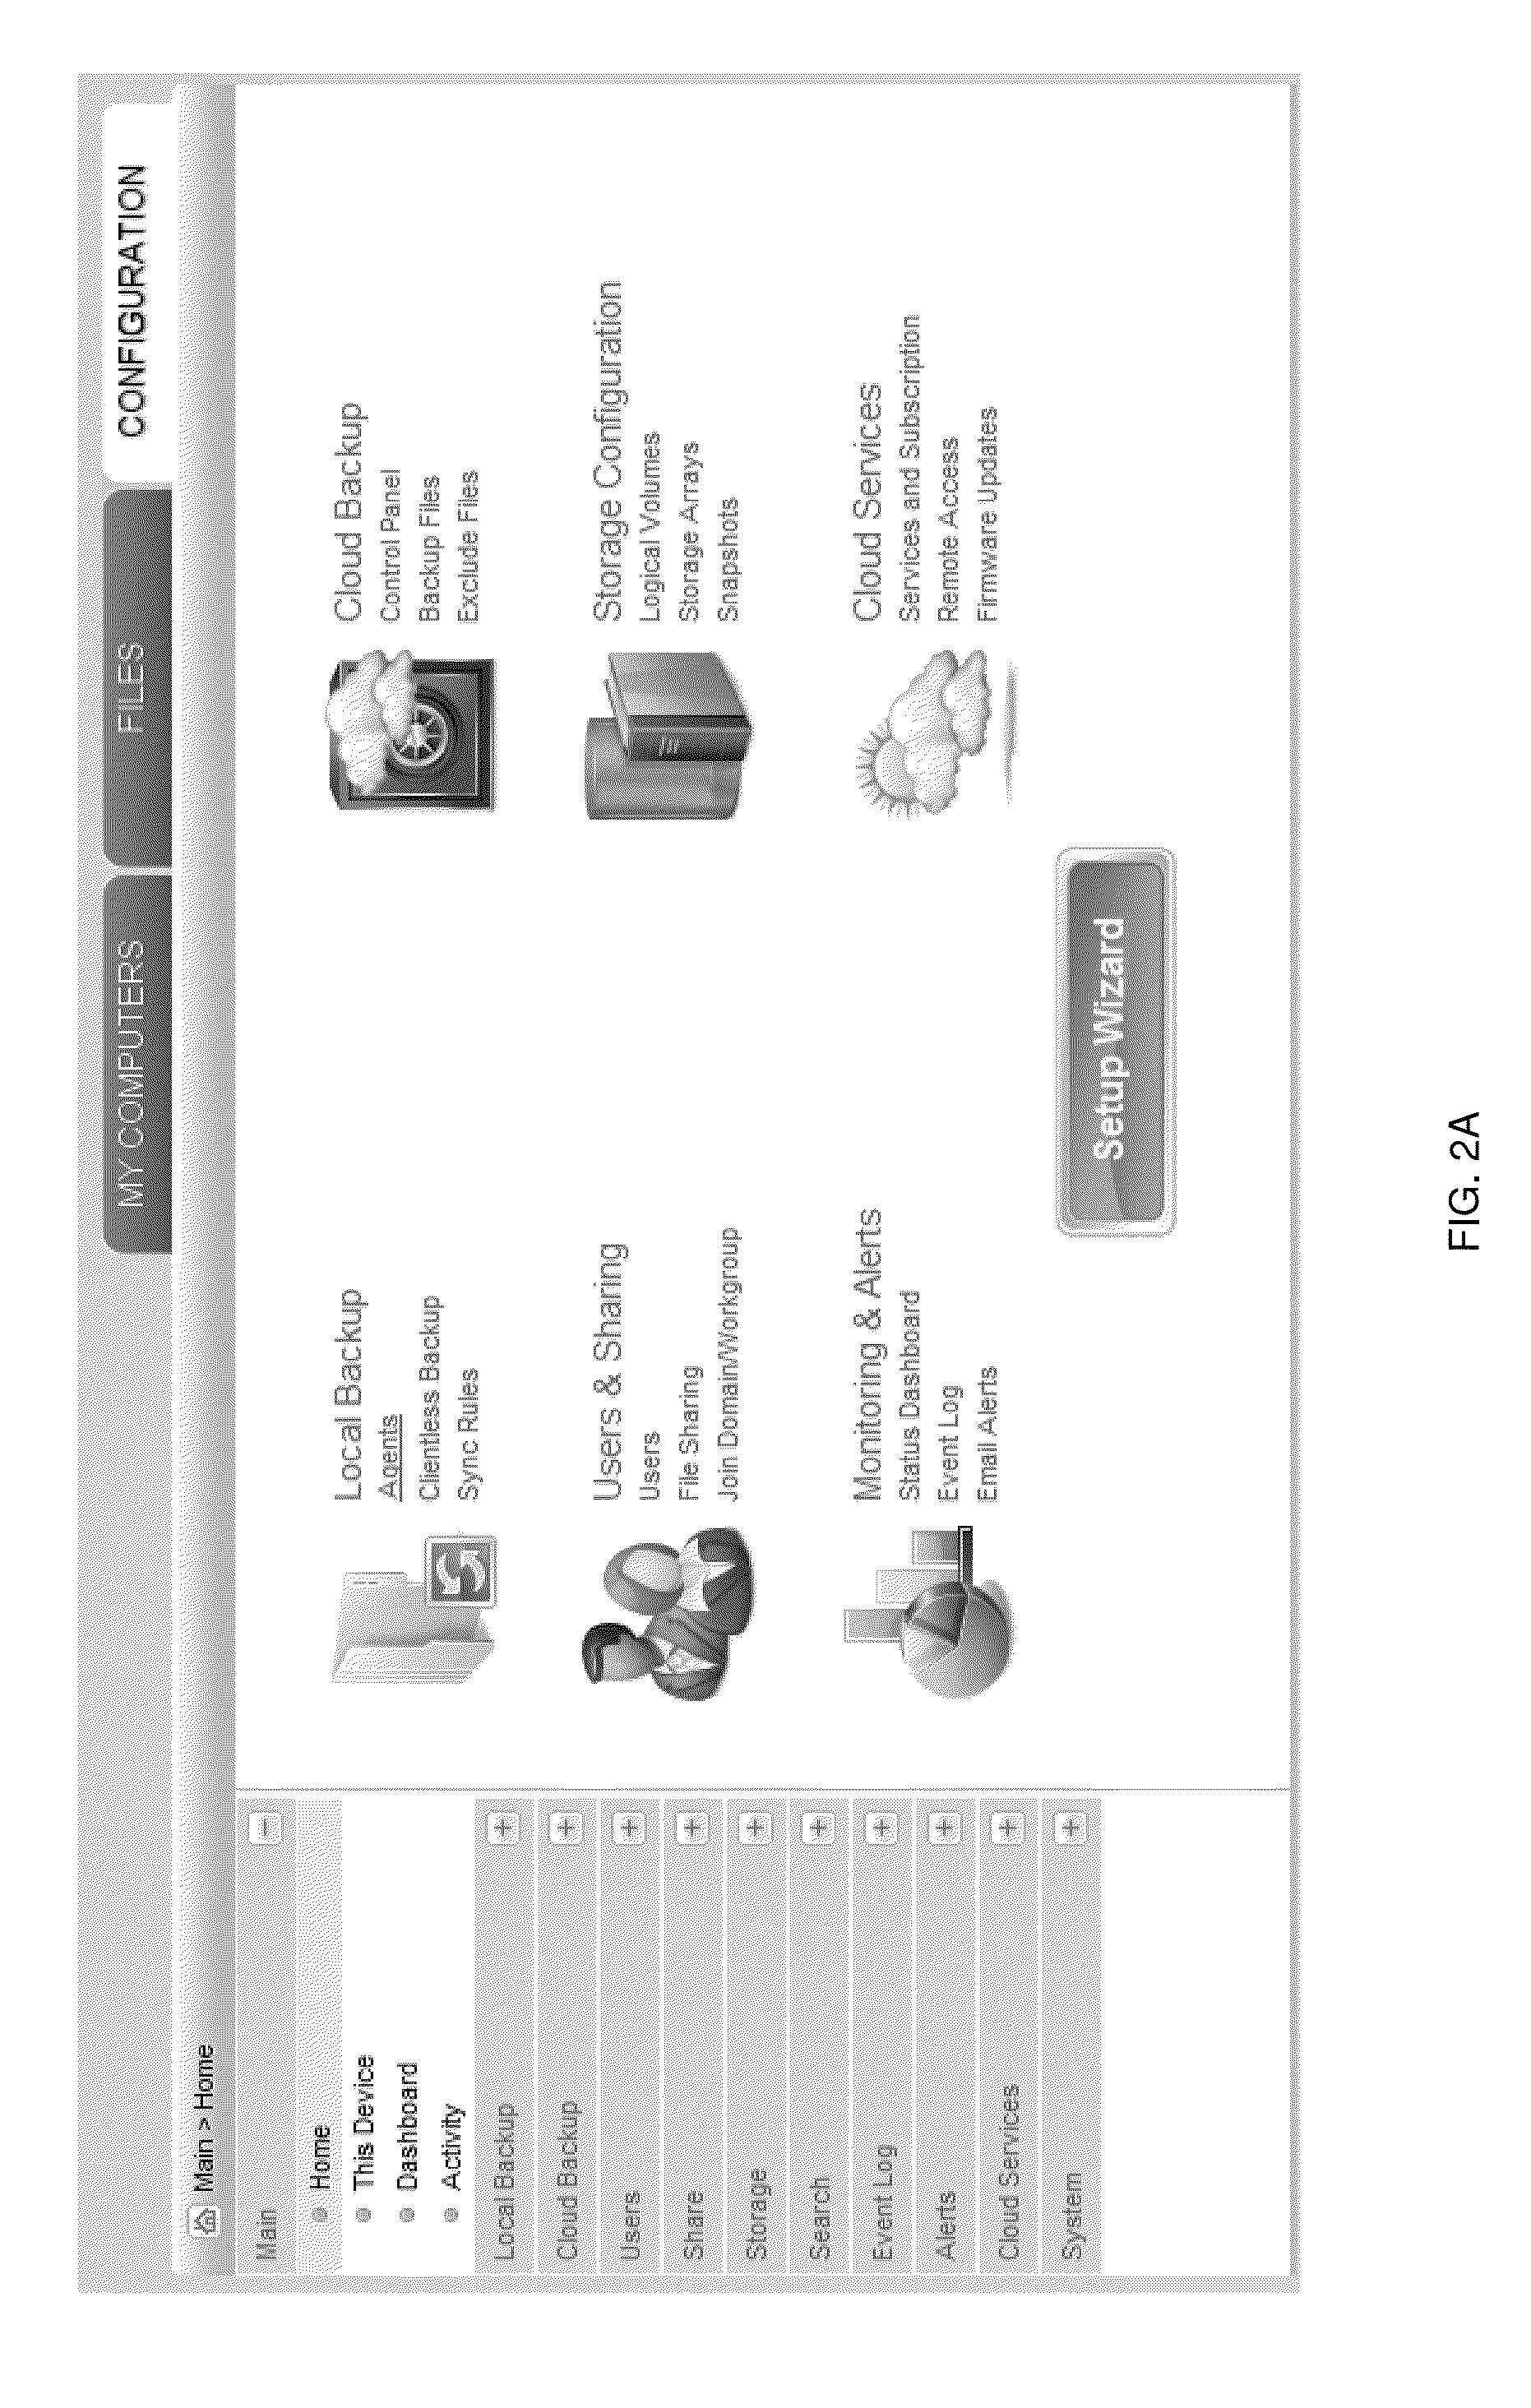 Remote access service for cloud-enabled network devices